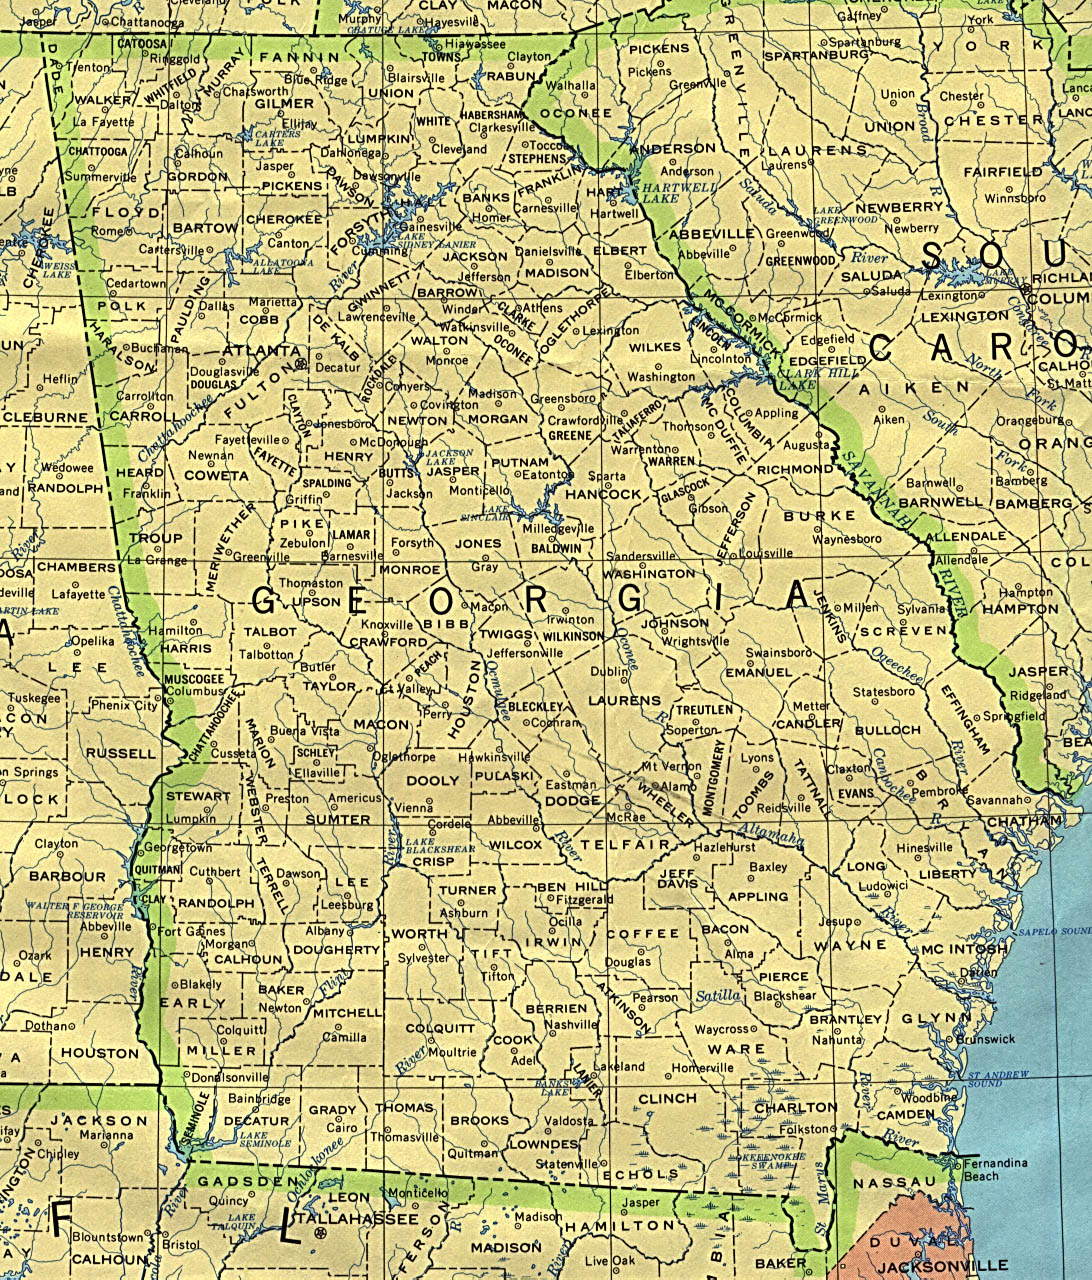 Georgia Maps - Perry-Castañeda Map Collection - UT Library Online